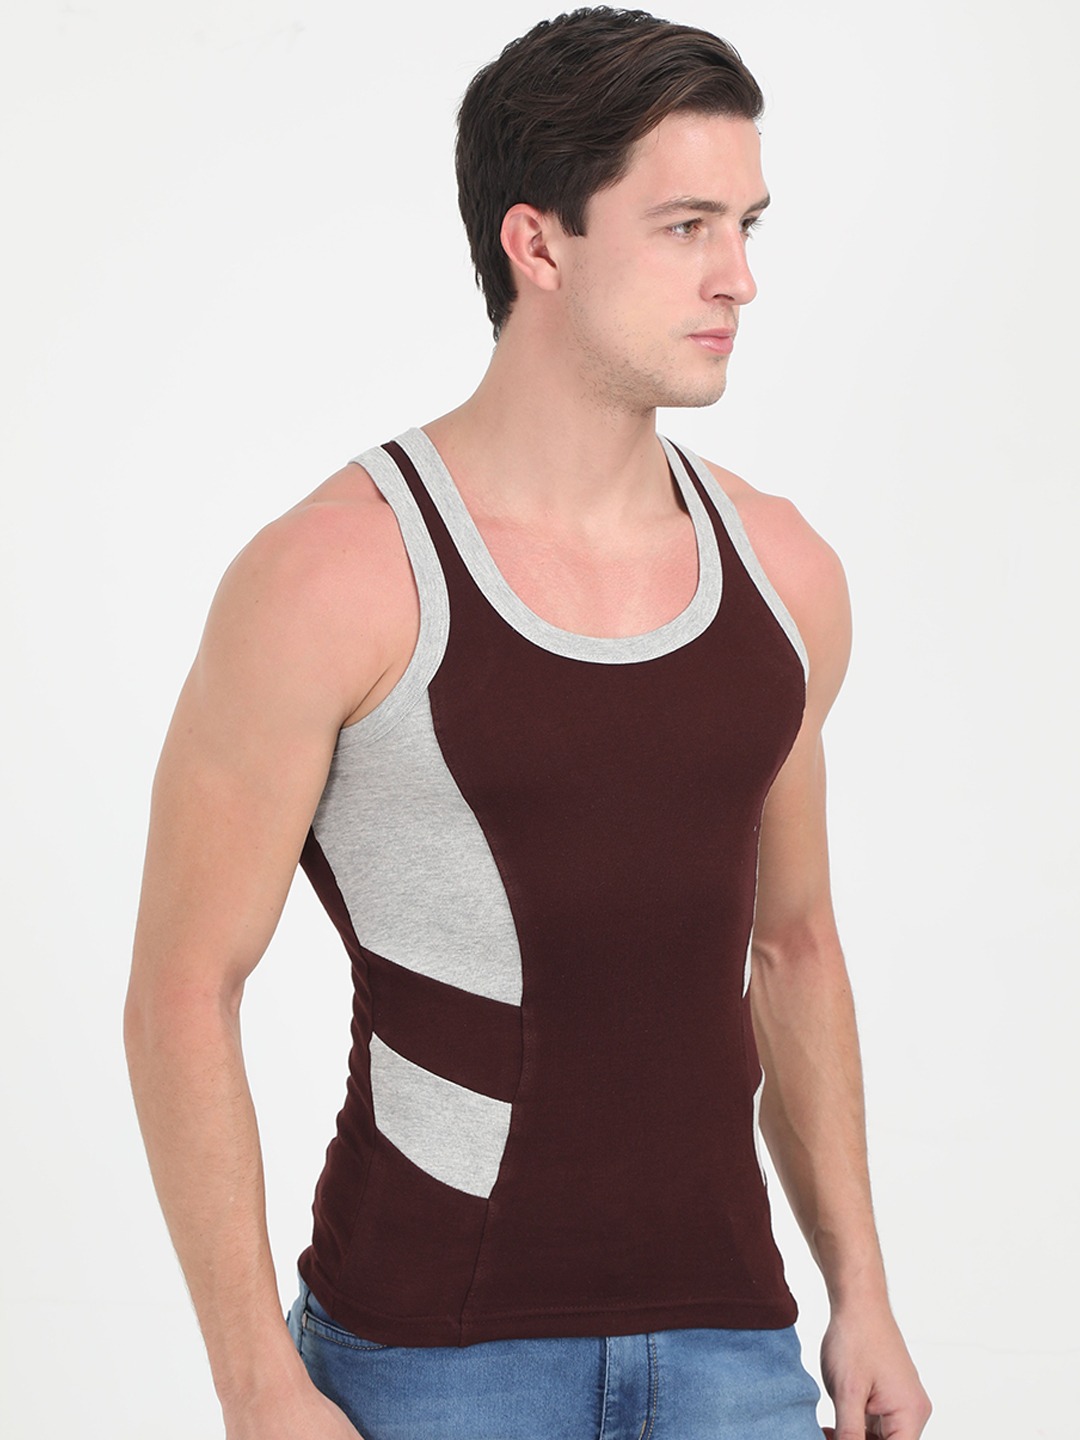 Clothing Innerwear Vests | Genx Men Pack Of 2 Assorted Solid Gym Vests - JH23414